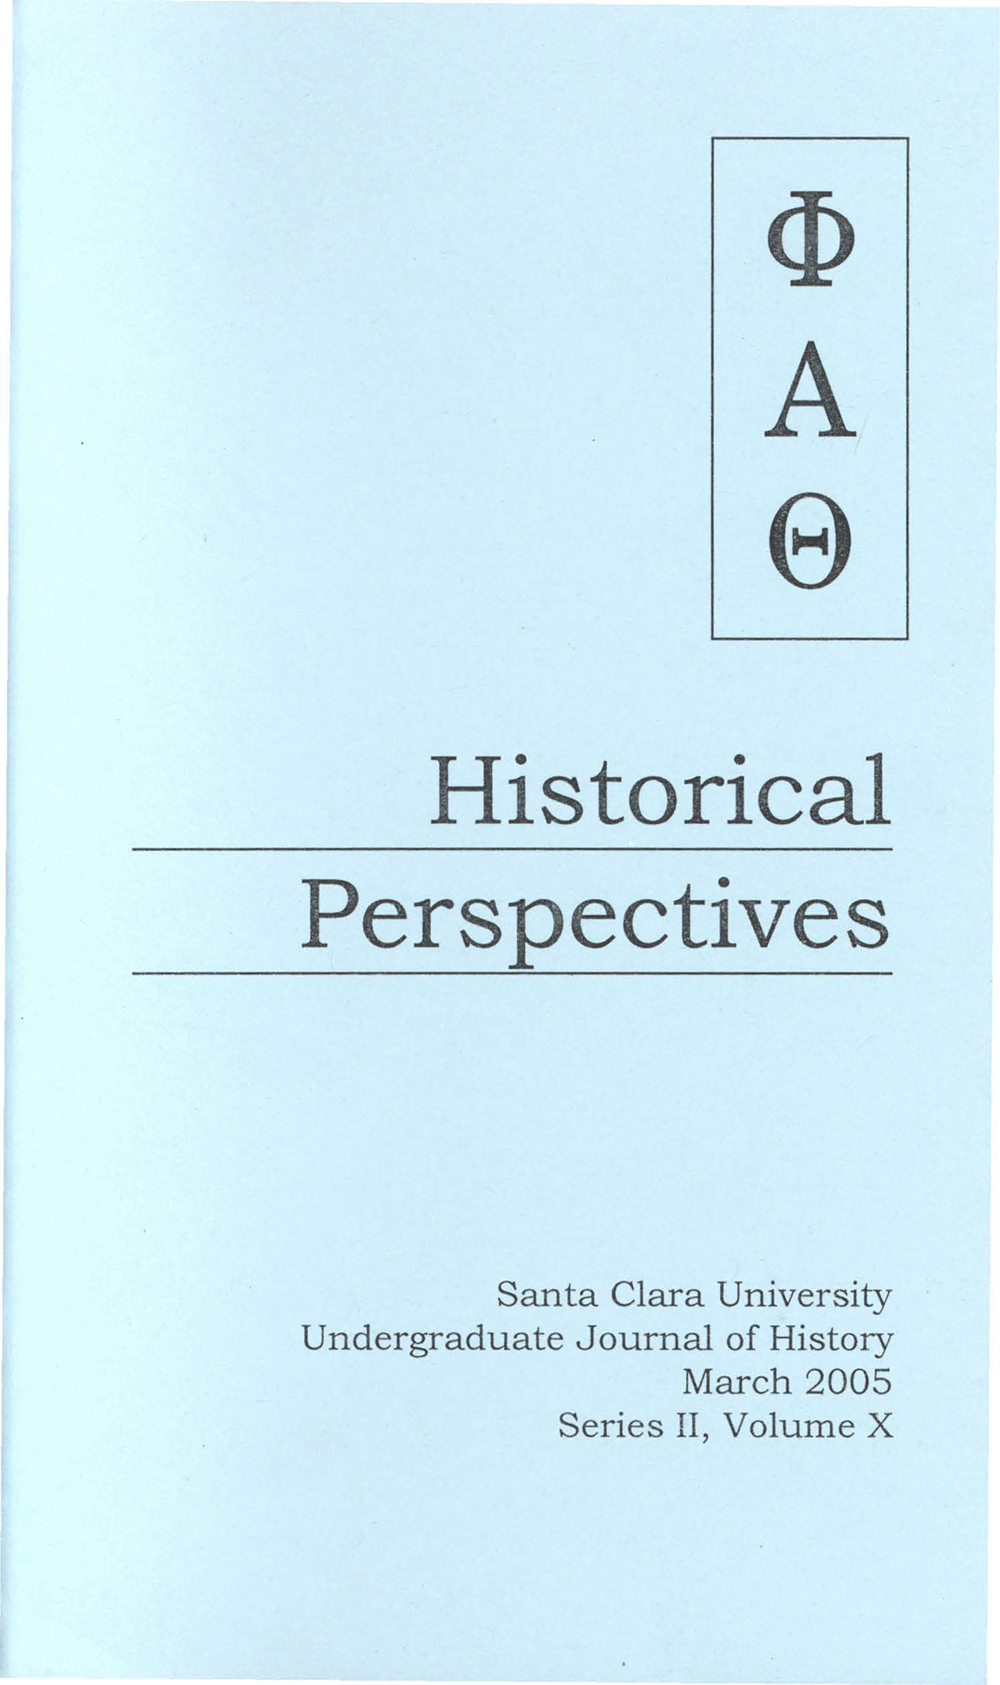 Historical Perspectives 2005, volume 10